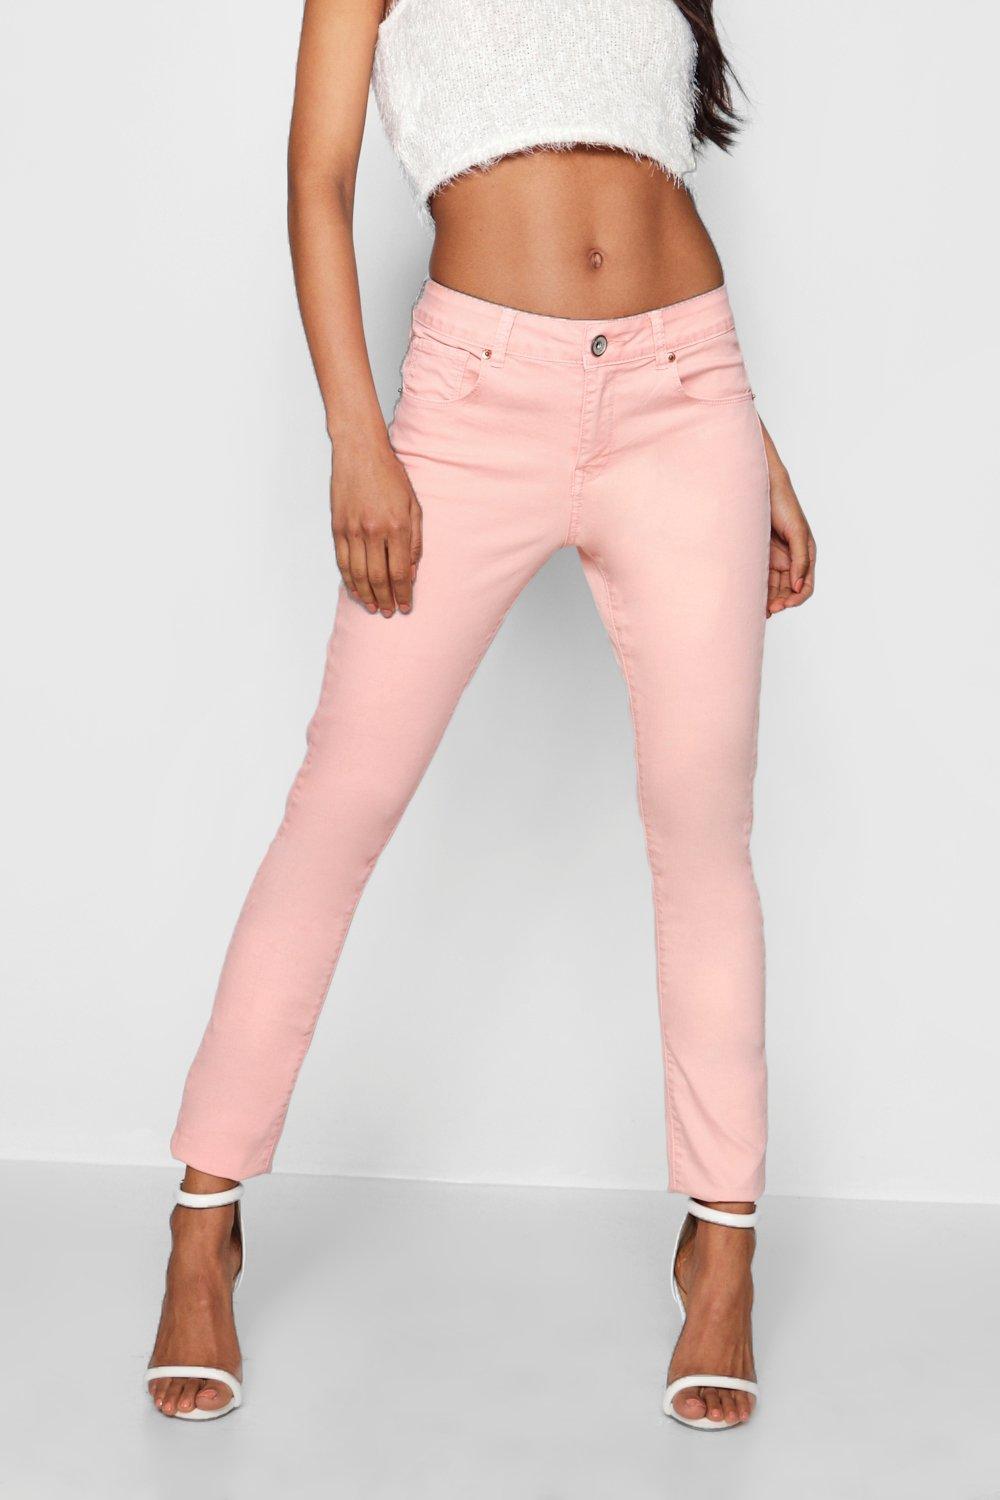 pink jeans